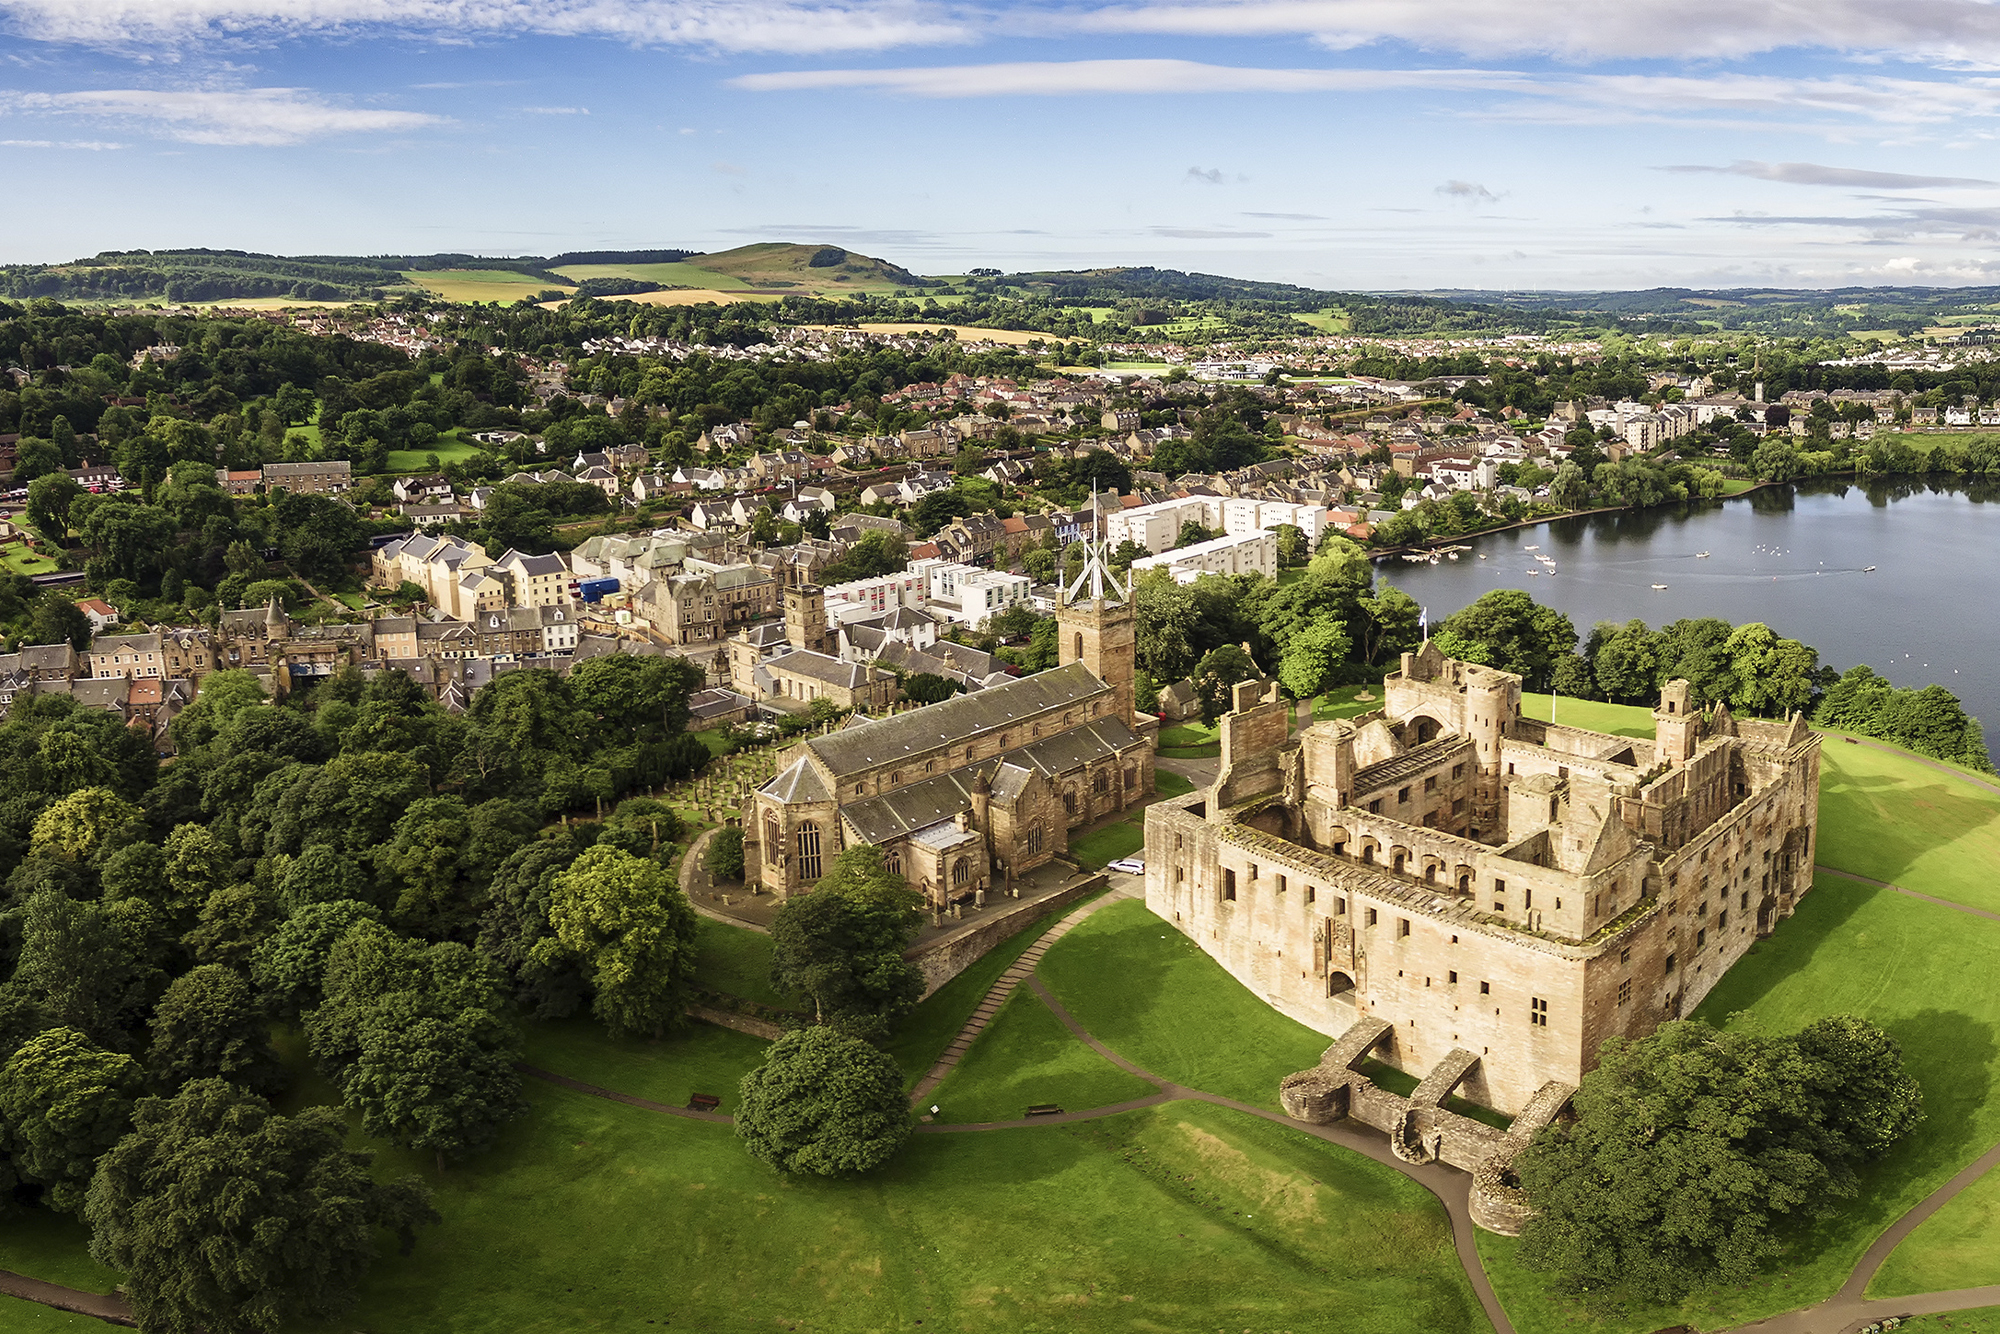 Ariel view of Linlithgow, Scotland